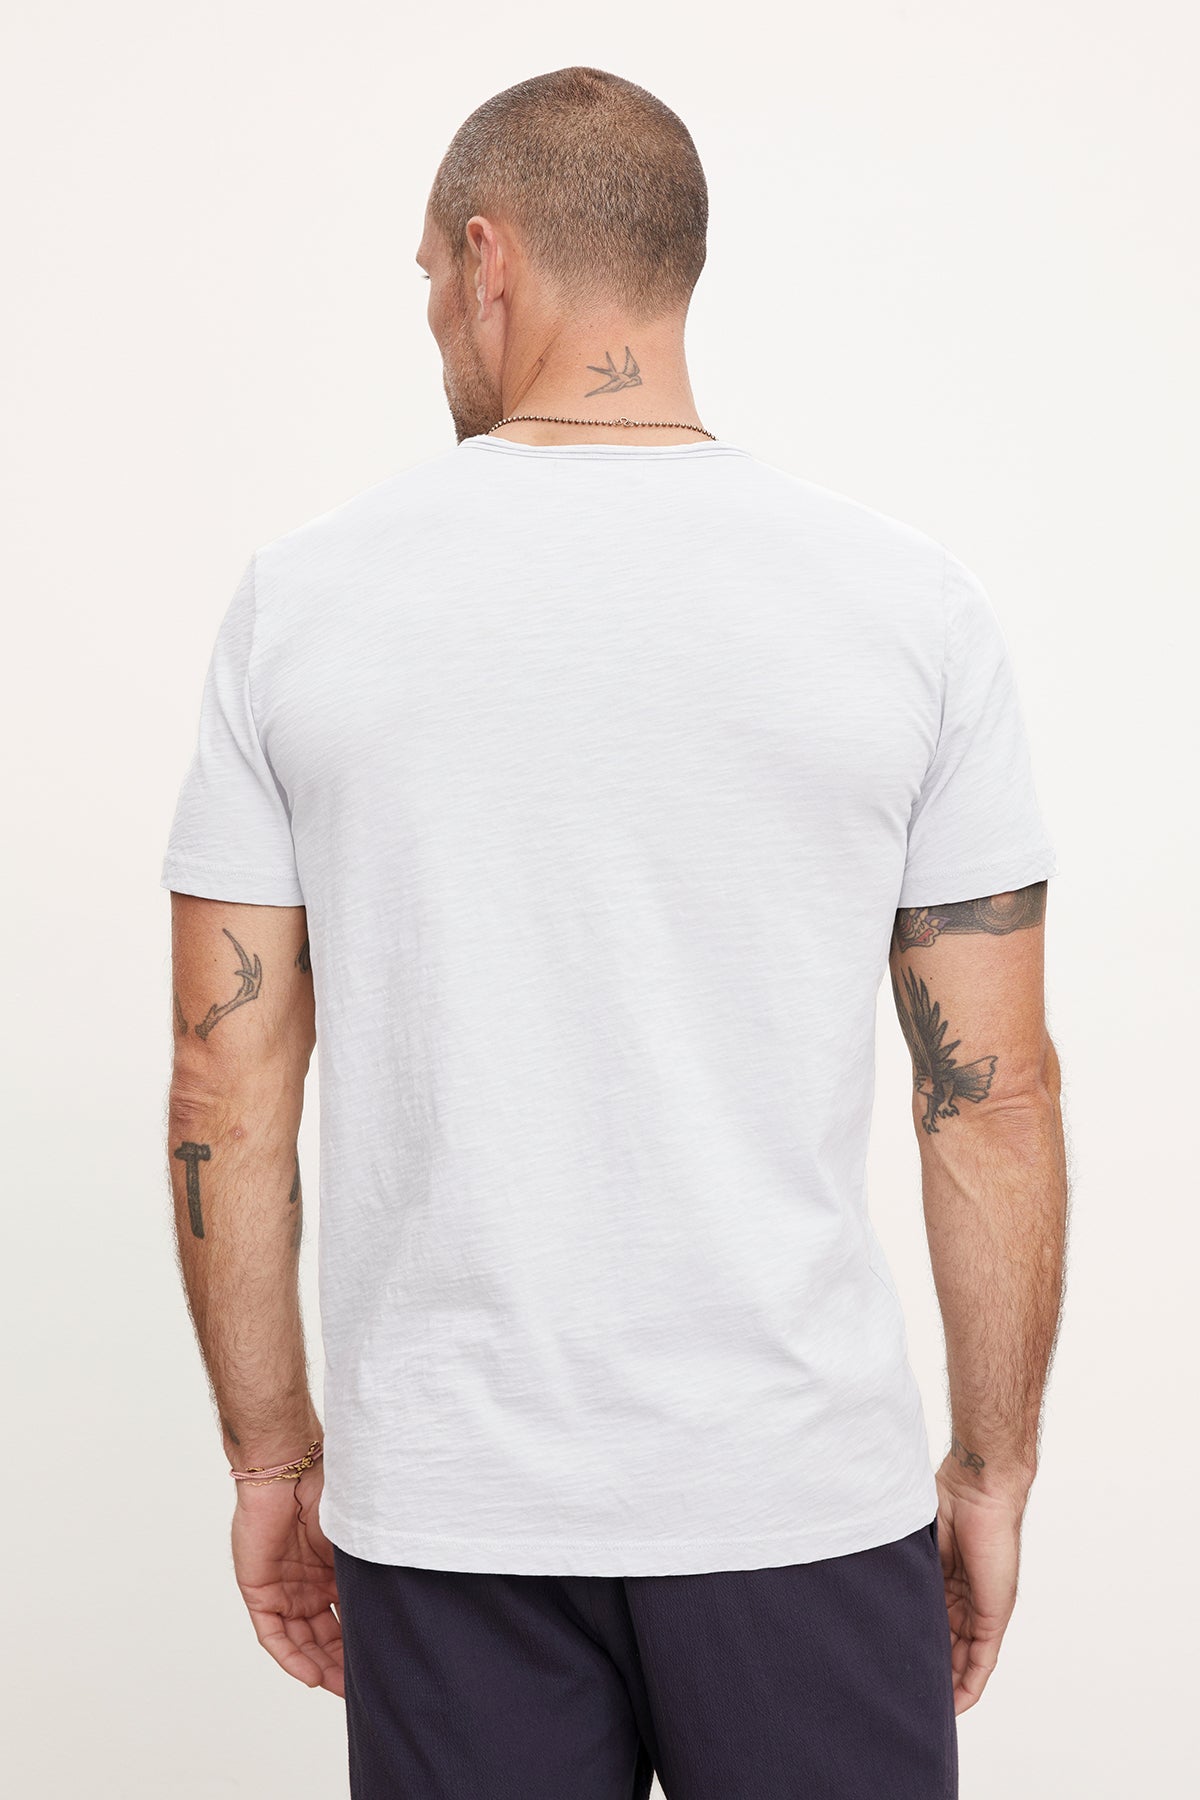 A man viewed from behind, wearing a white CHAD TEE with raw-edge details by Velvet by Graham & Spencer and navy pants, showcasing tattoos on his arms and a neck tattoo.-36909348815041